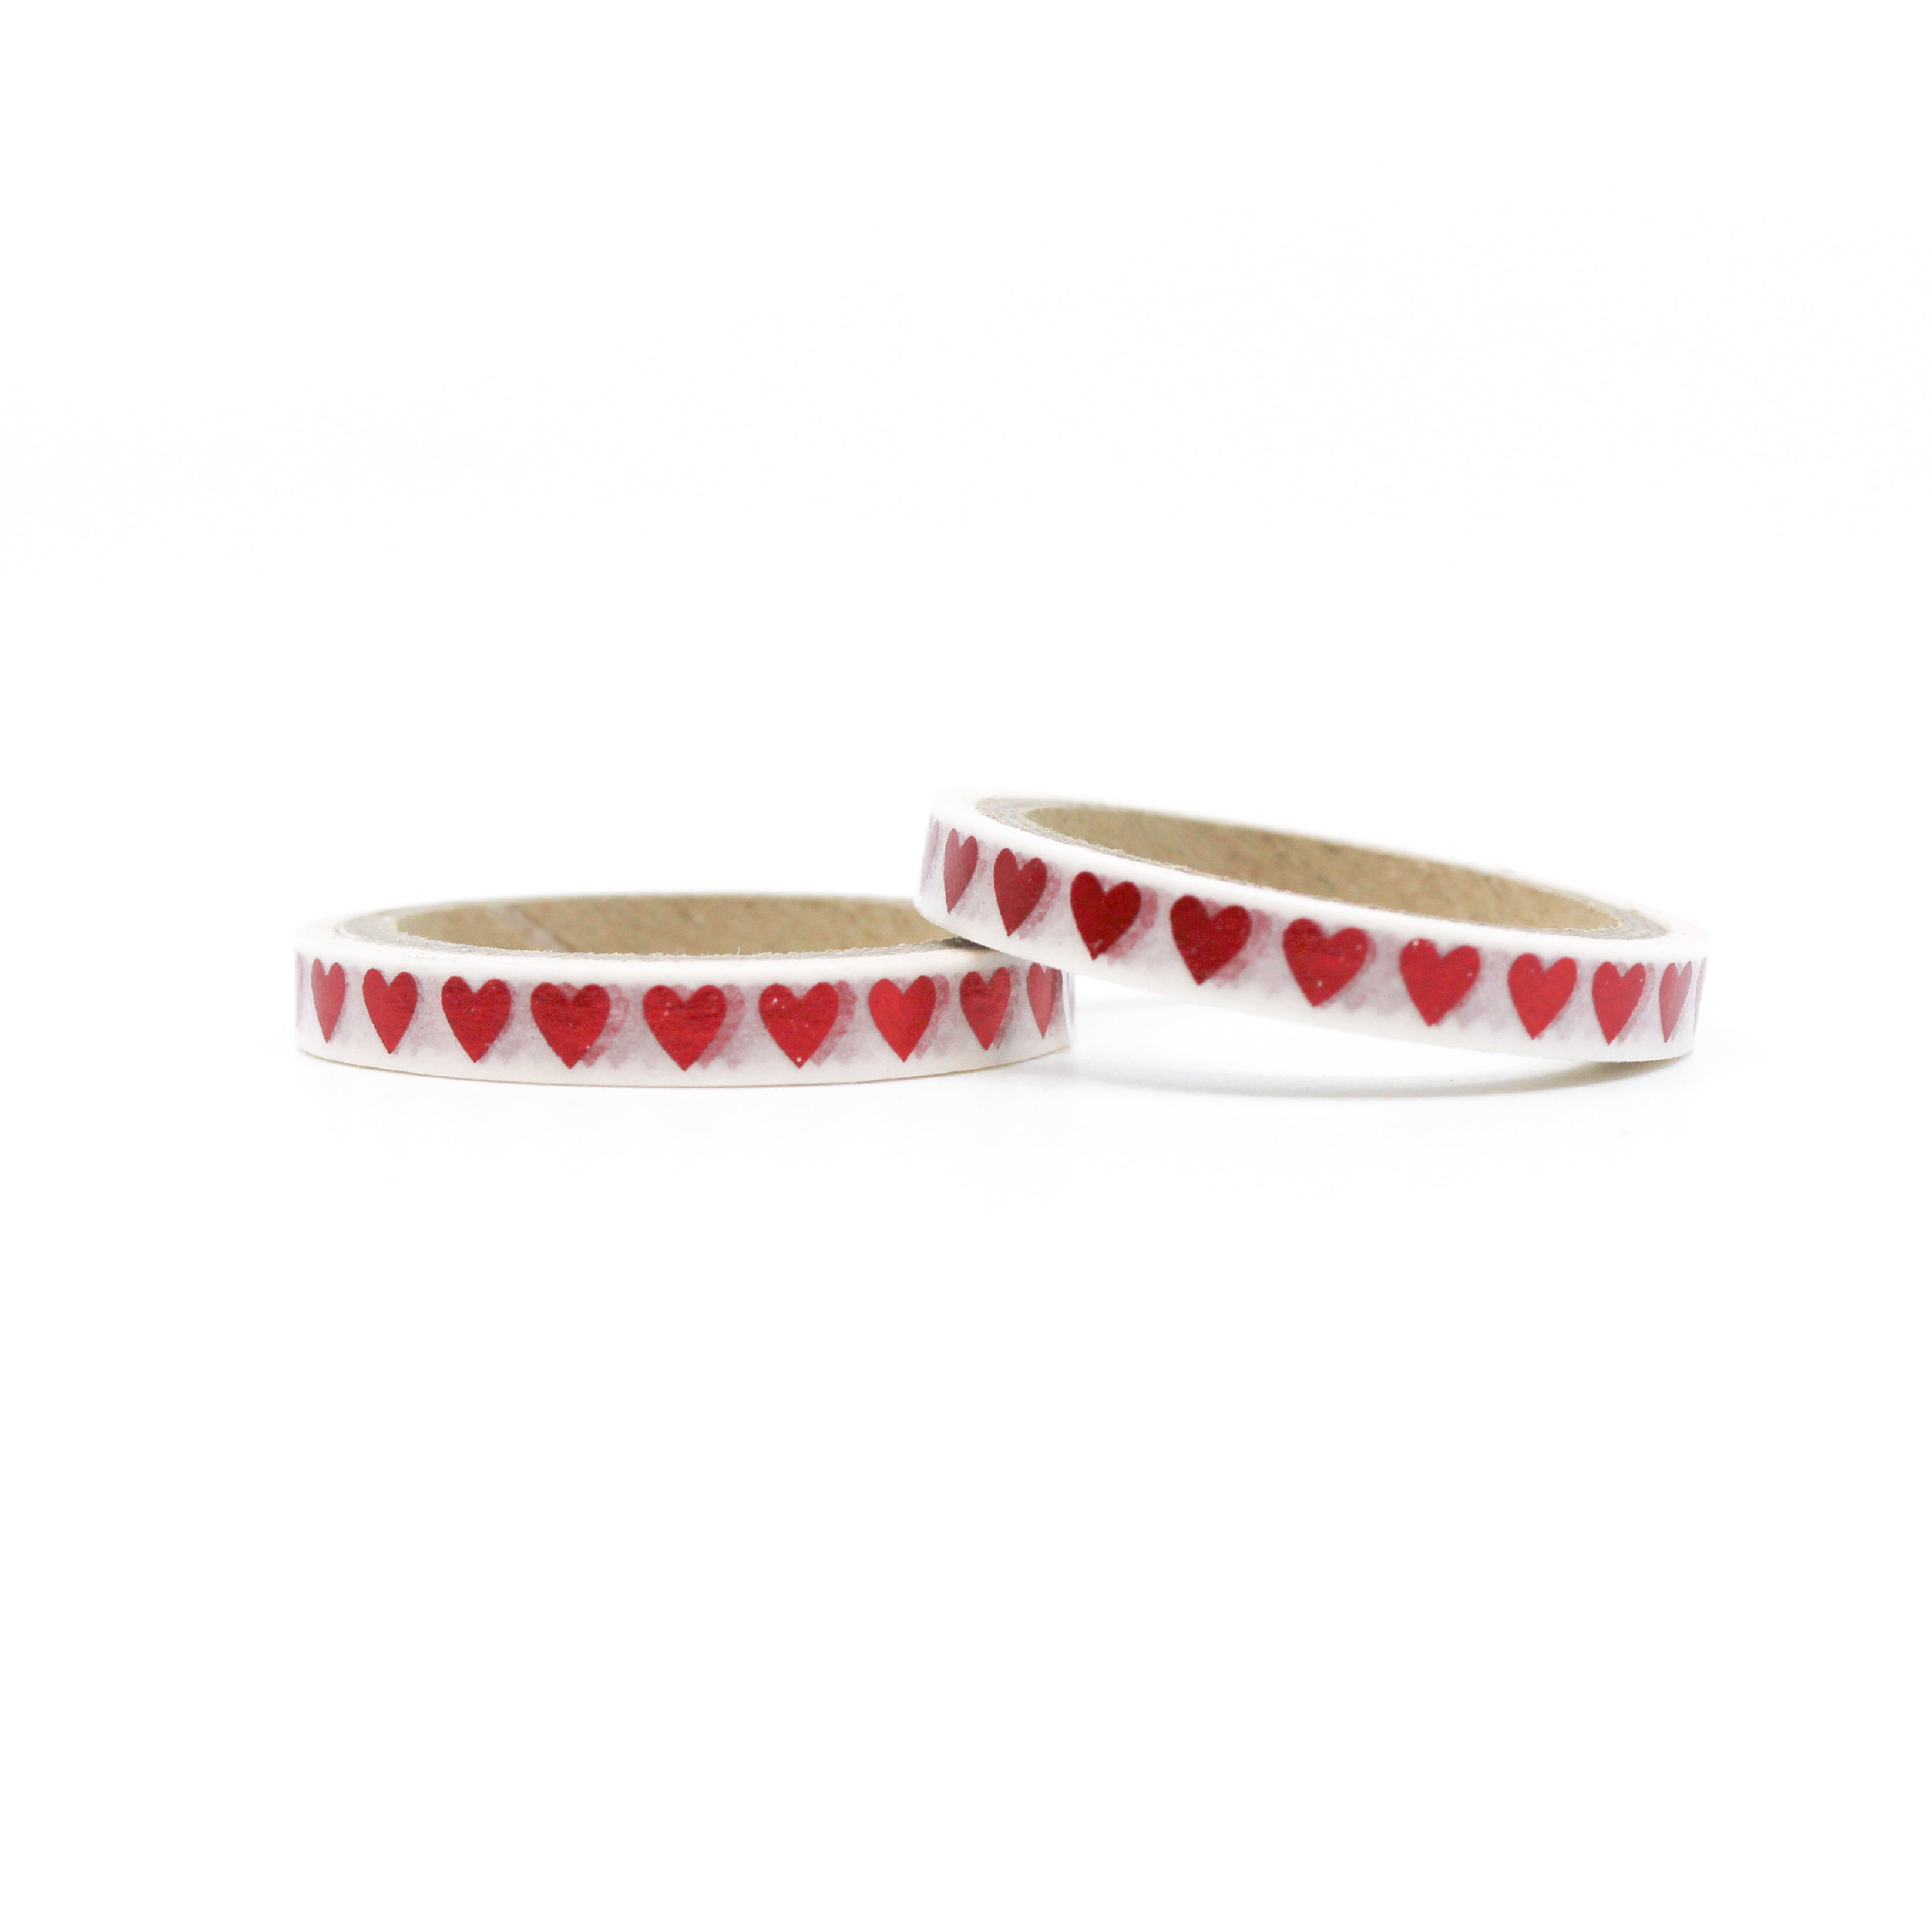 This is a roll of red hearts foil red stripe washi tapes from BBB Supplies Craft Shop